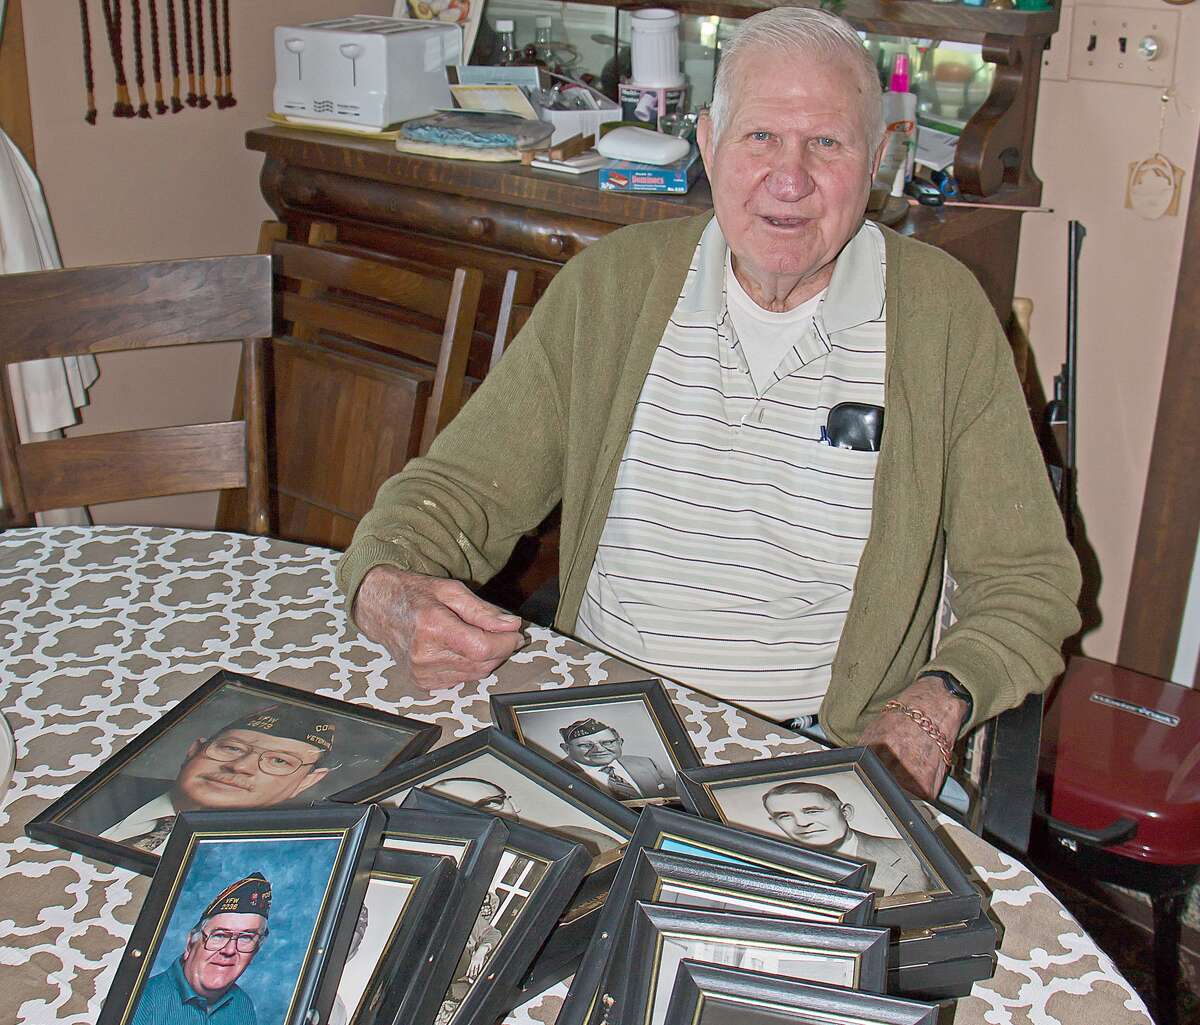 Joe Burzinski, a member of the Pigeon VFW, is on a mission to find relatives or friends of past post commanders that may be interested in having photos of their loved ones.